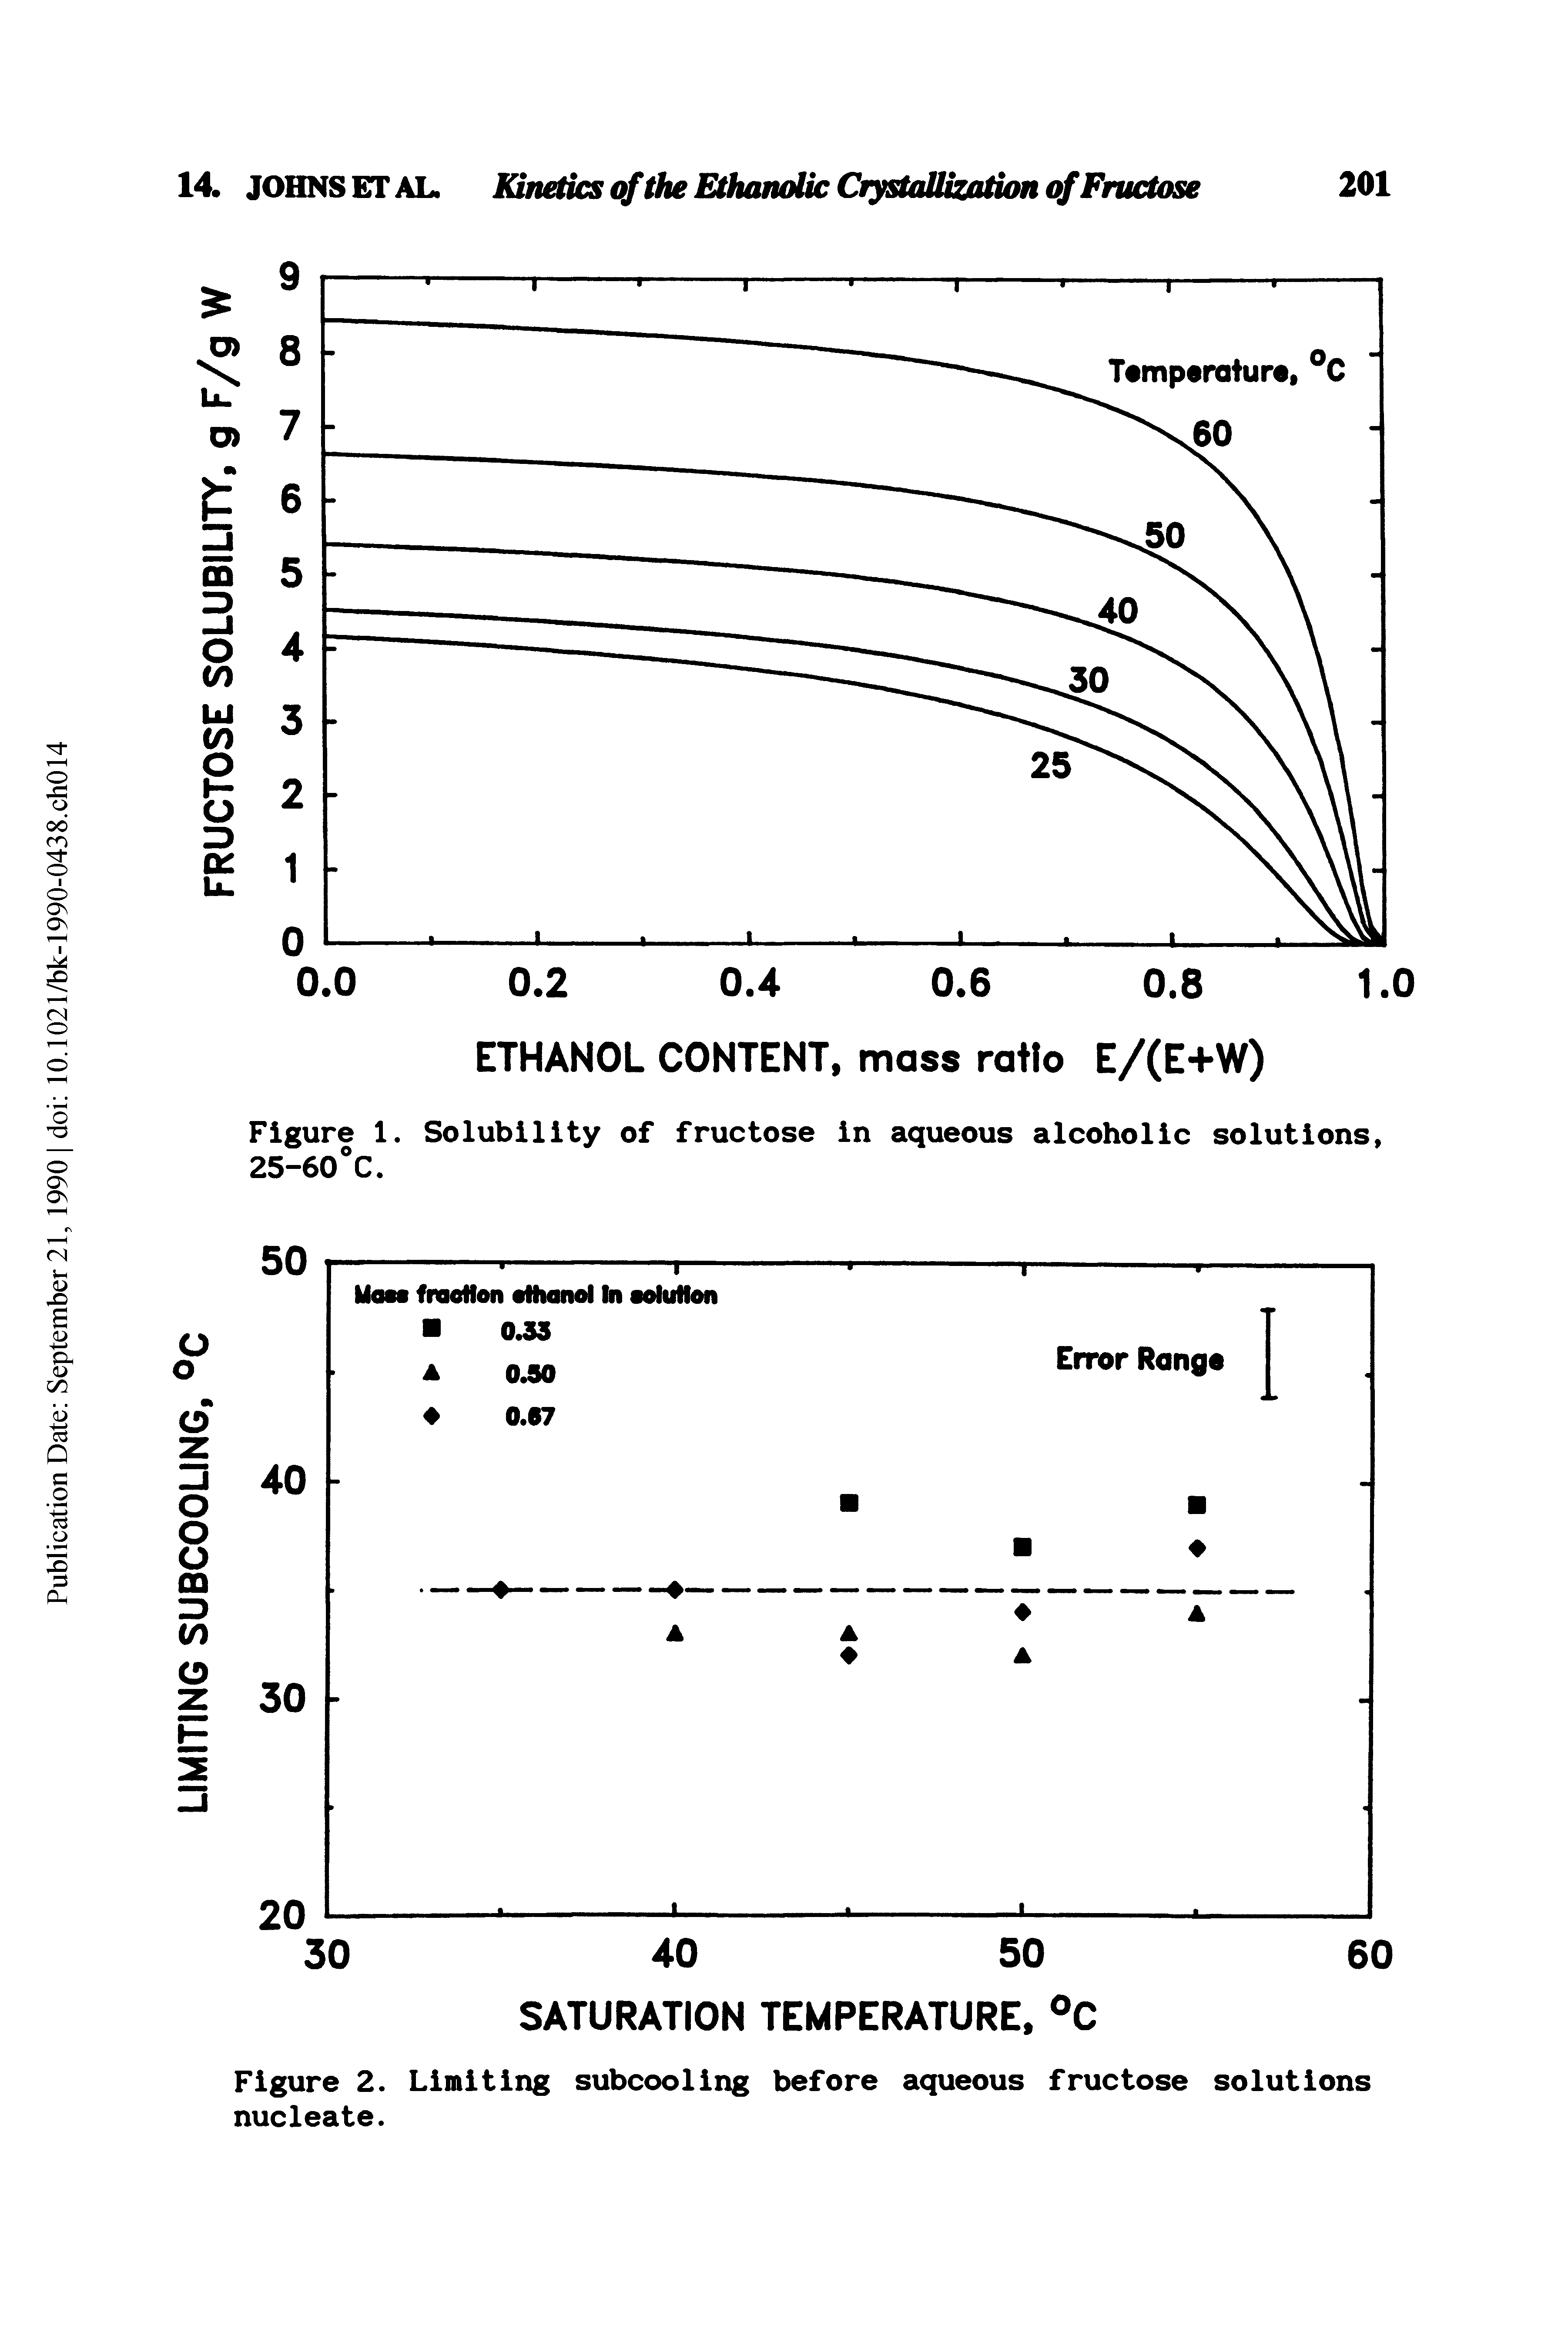 Figure 2. Limiting subcooling before aqueous fructose solutions nucleate.